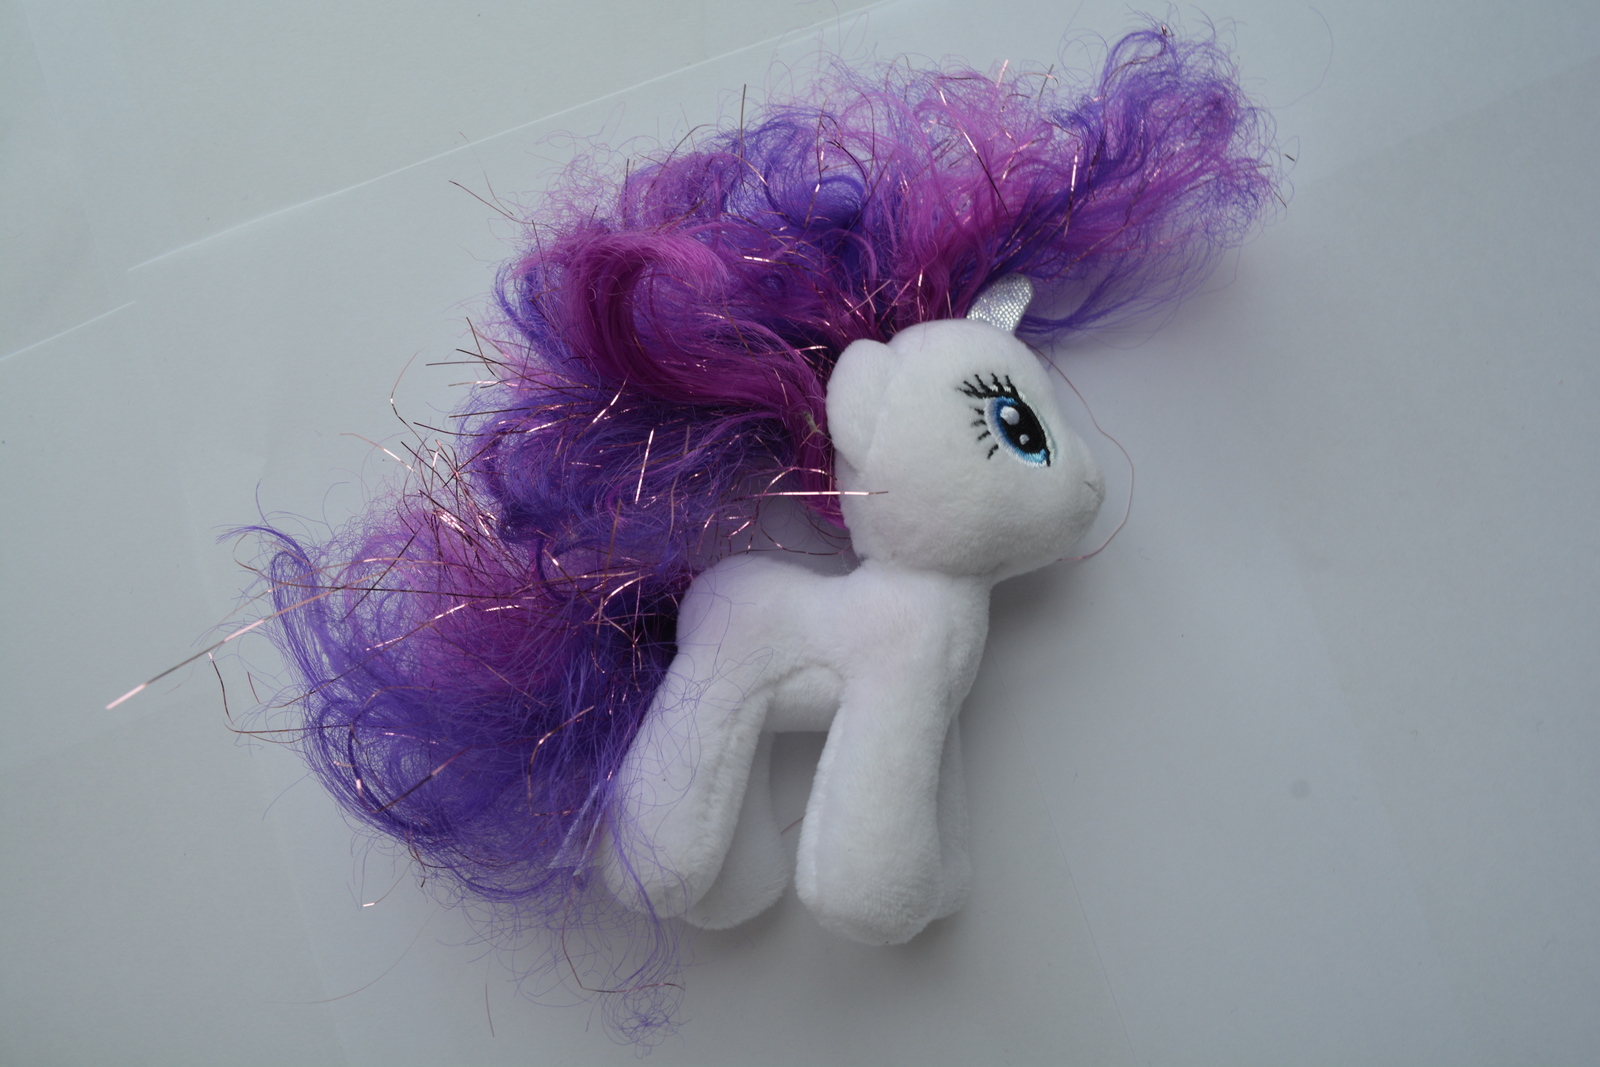 Rarity Ty Beanie Buddies Plush My Little Pony 2015 about 12.5 cm Used Please loo - $10.00